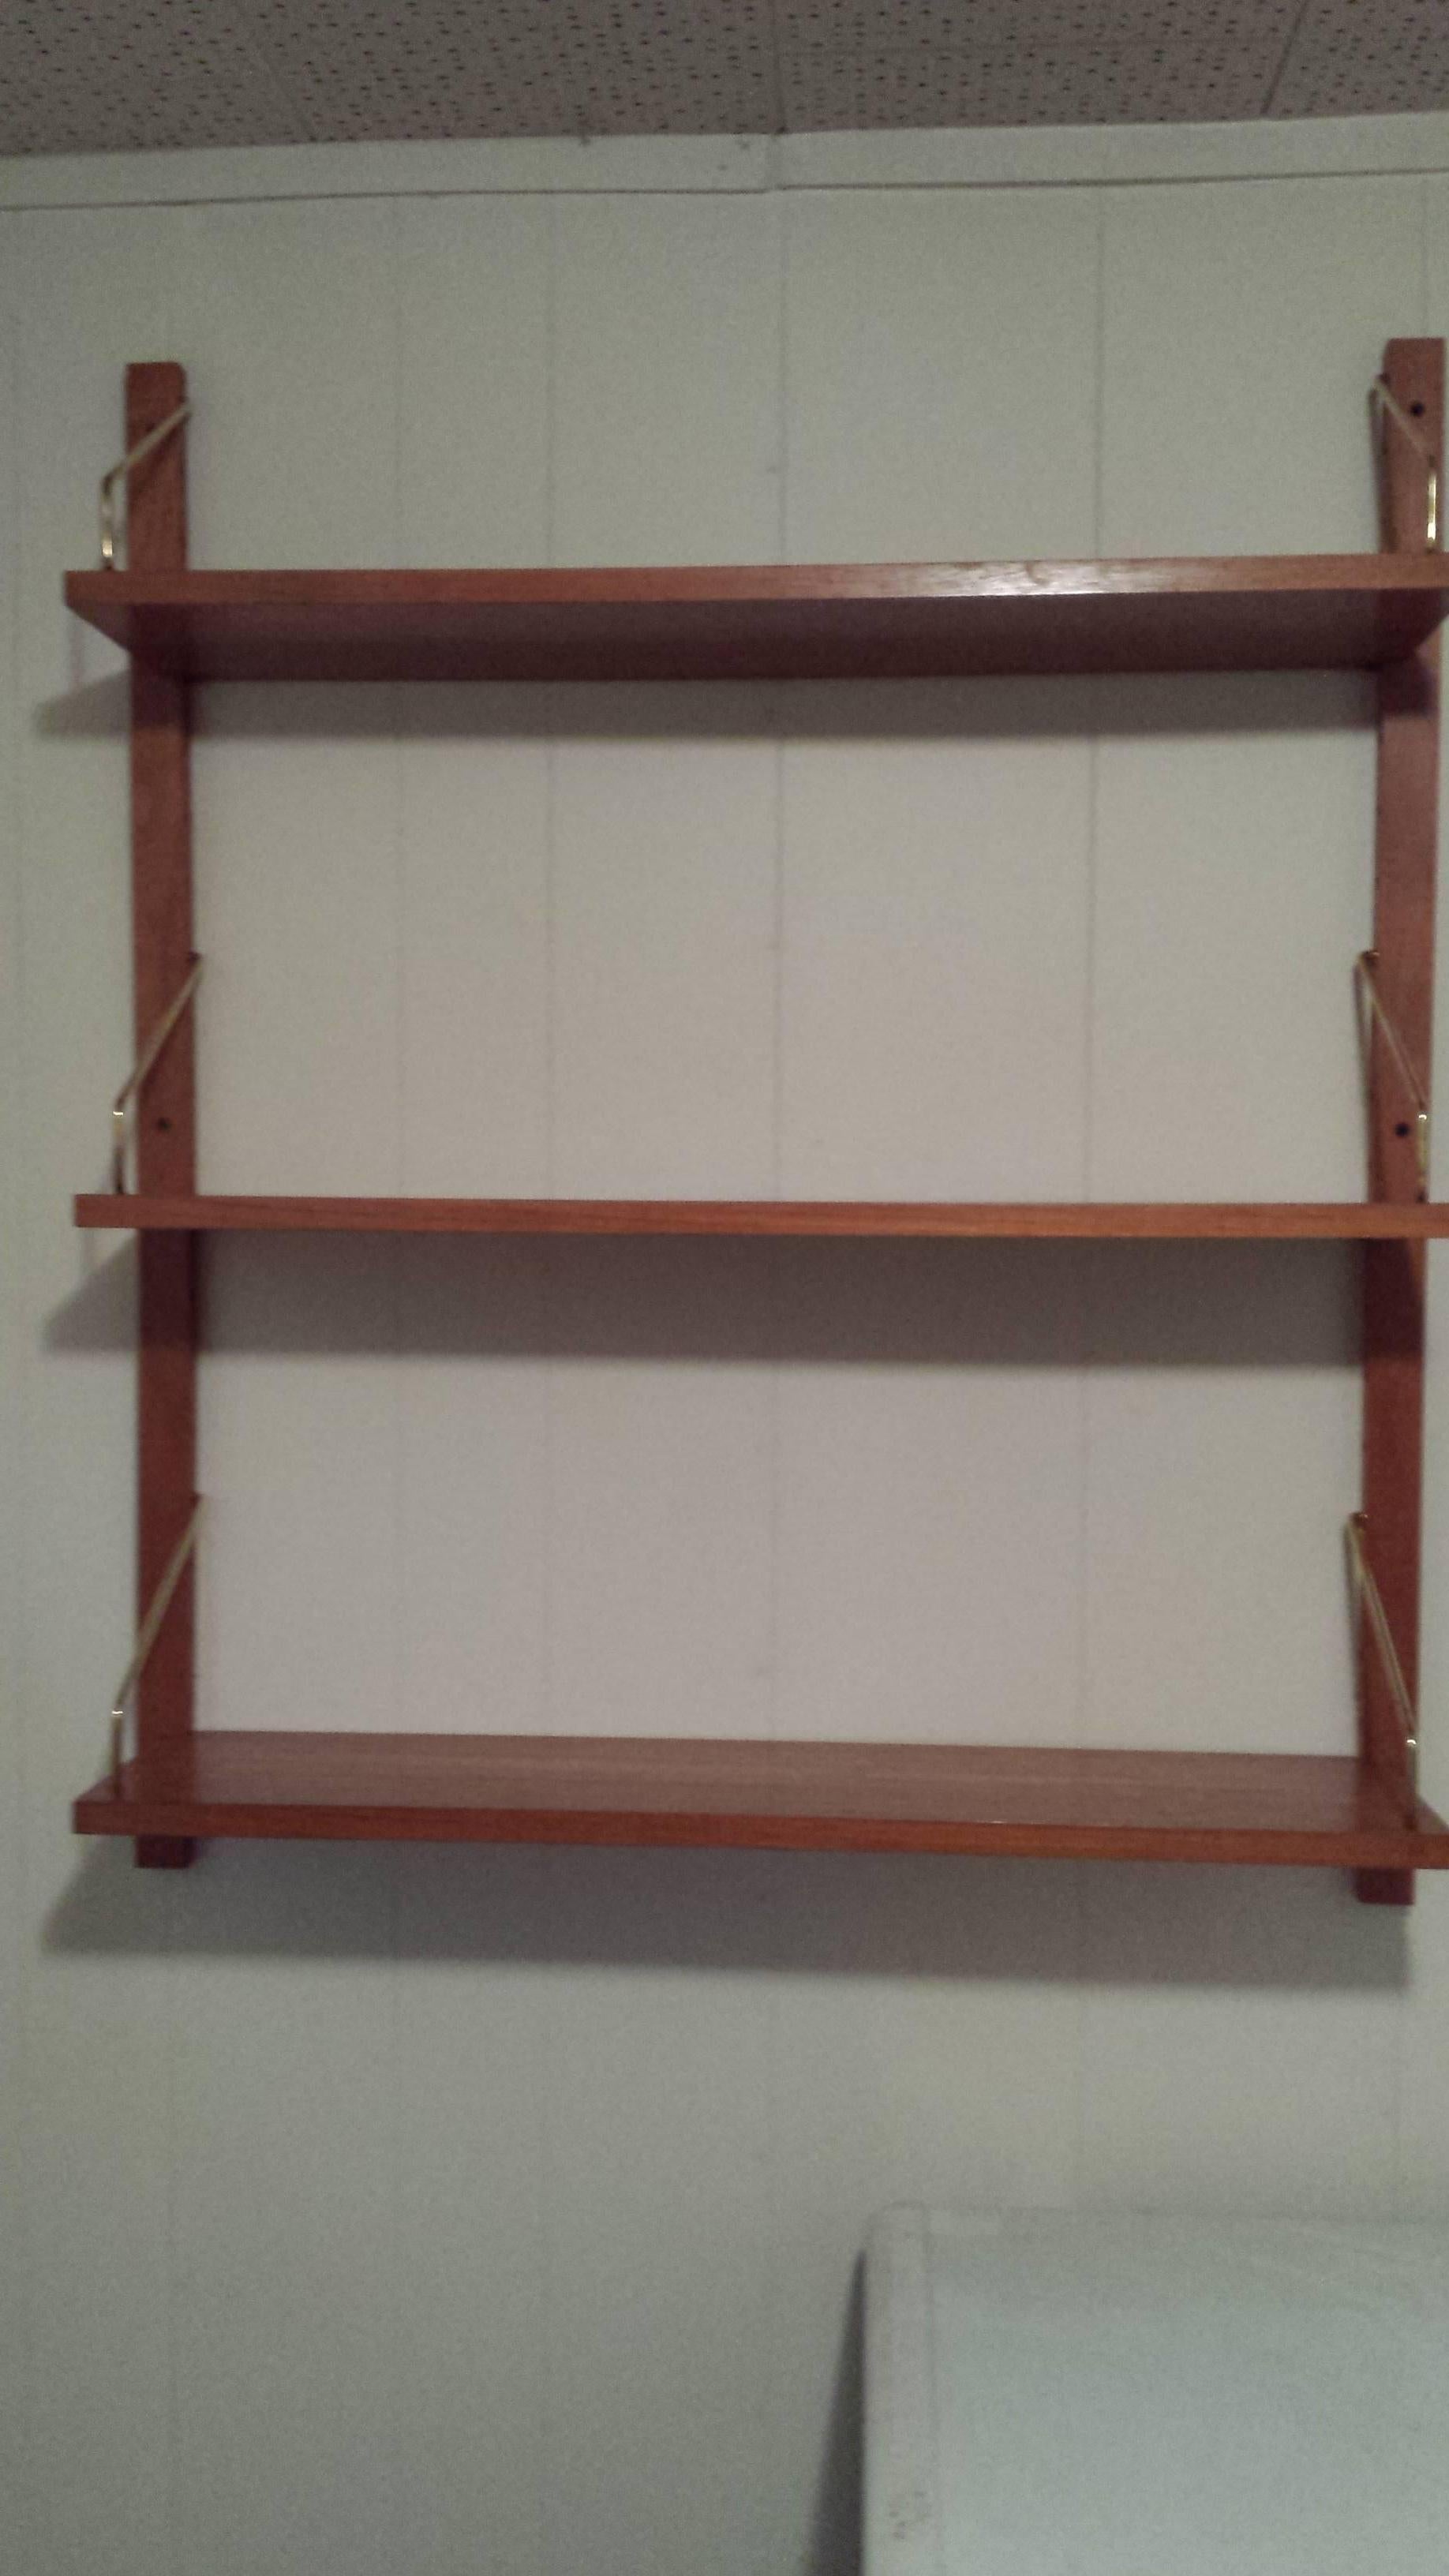 Mid Century Danish Solid Teak Adjustable 3-Shelf Wall Unit, Made in Denmark, Brass Shelf support brackets and shelf pins, 2-Support Brackets to mount on the wall, easy assembly. The shelf measures 39